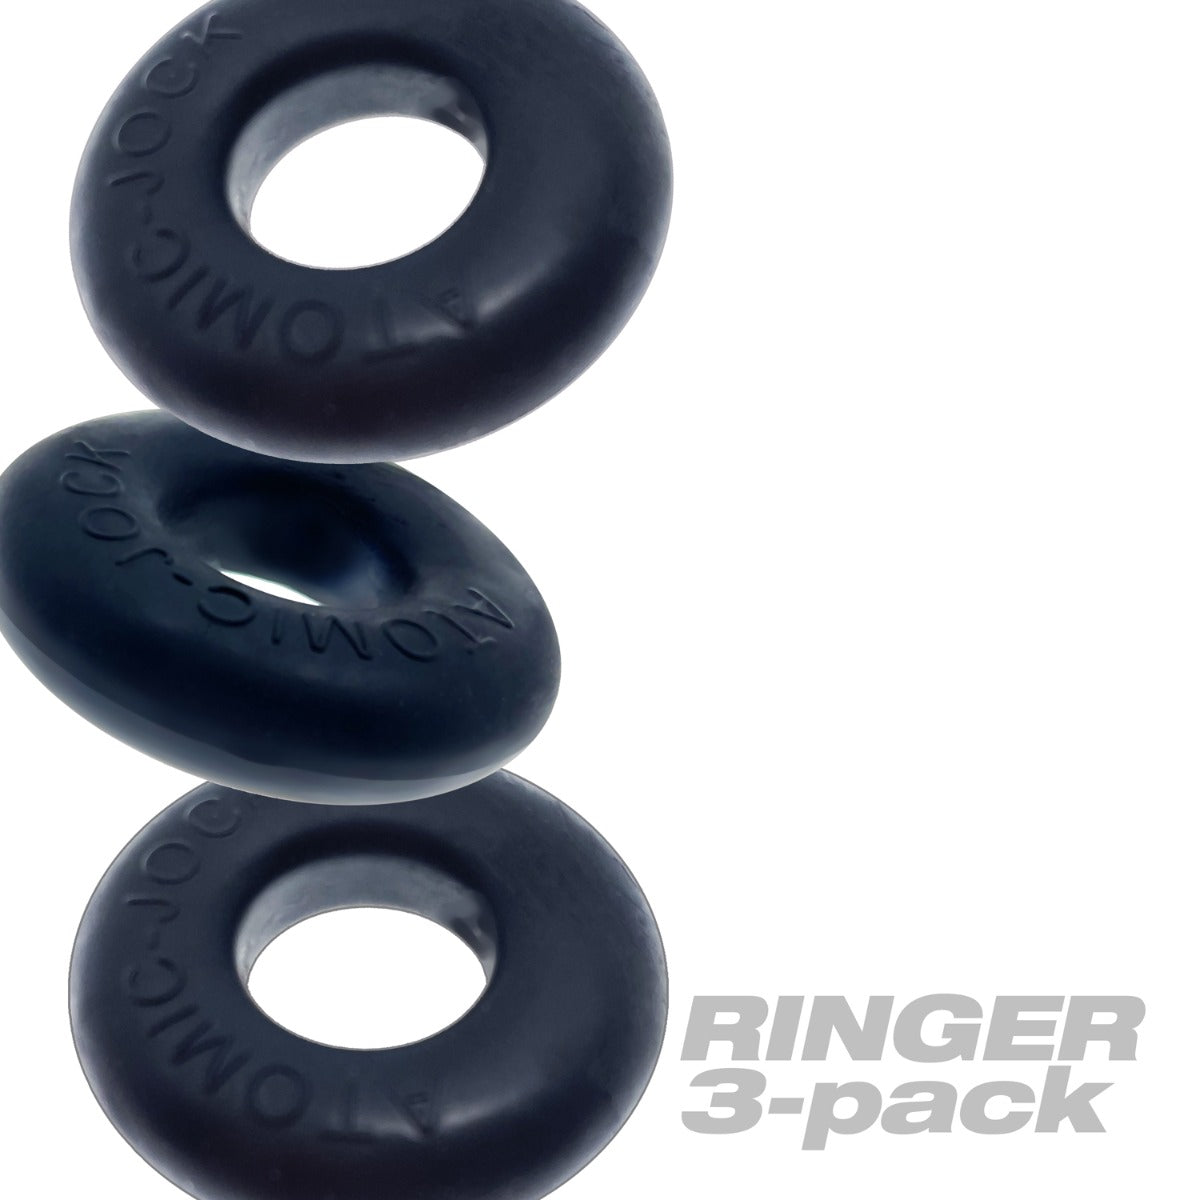 RINGER Cockring 3-pack Special Edition Night (8070337298671)